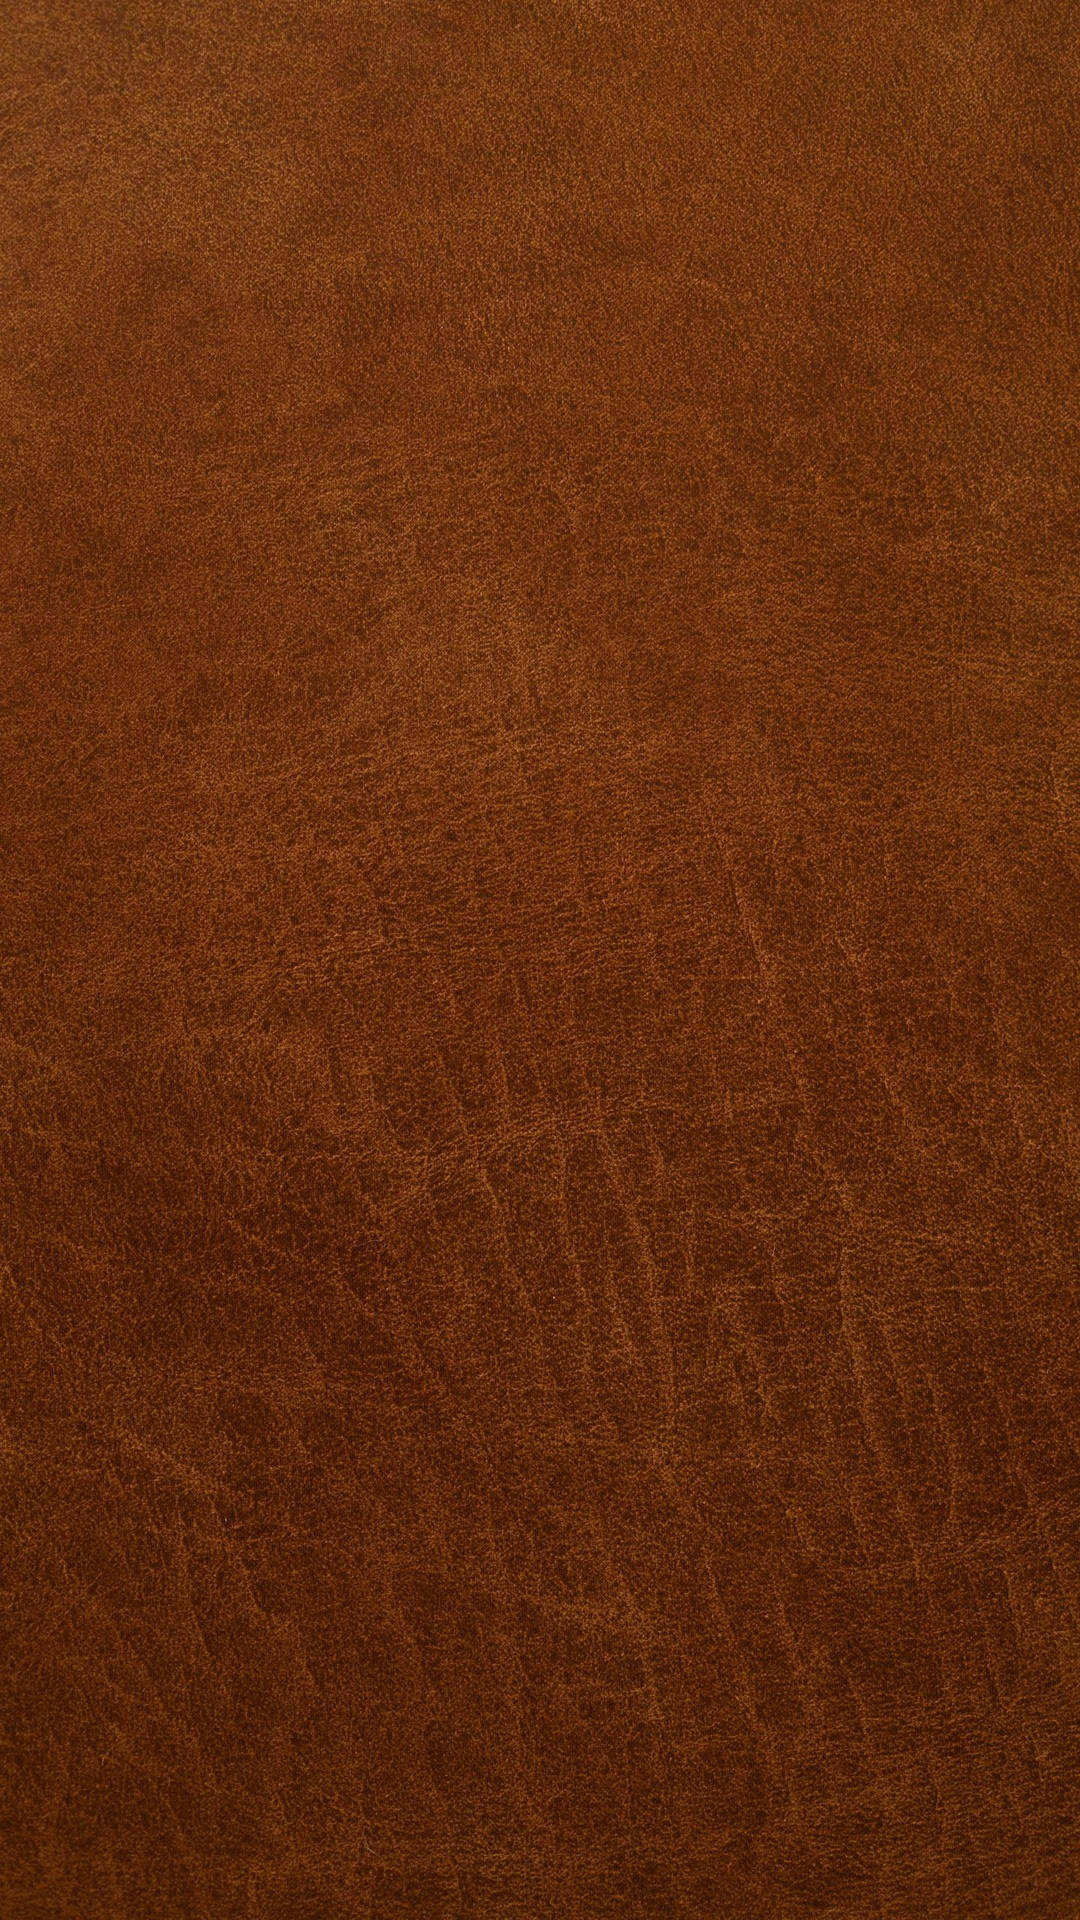 Leather Texture Brown Iphone Background